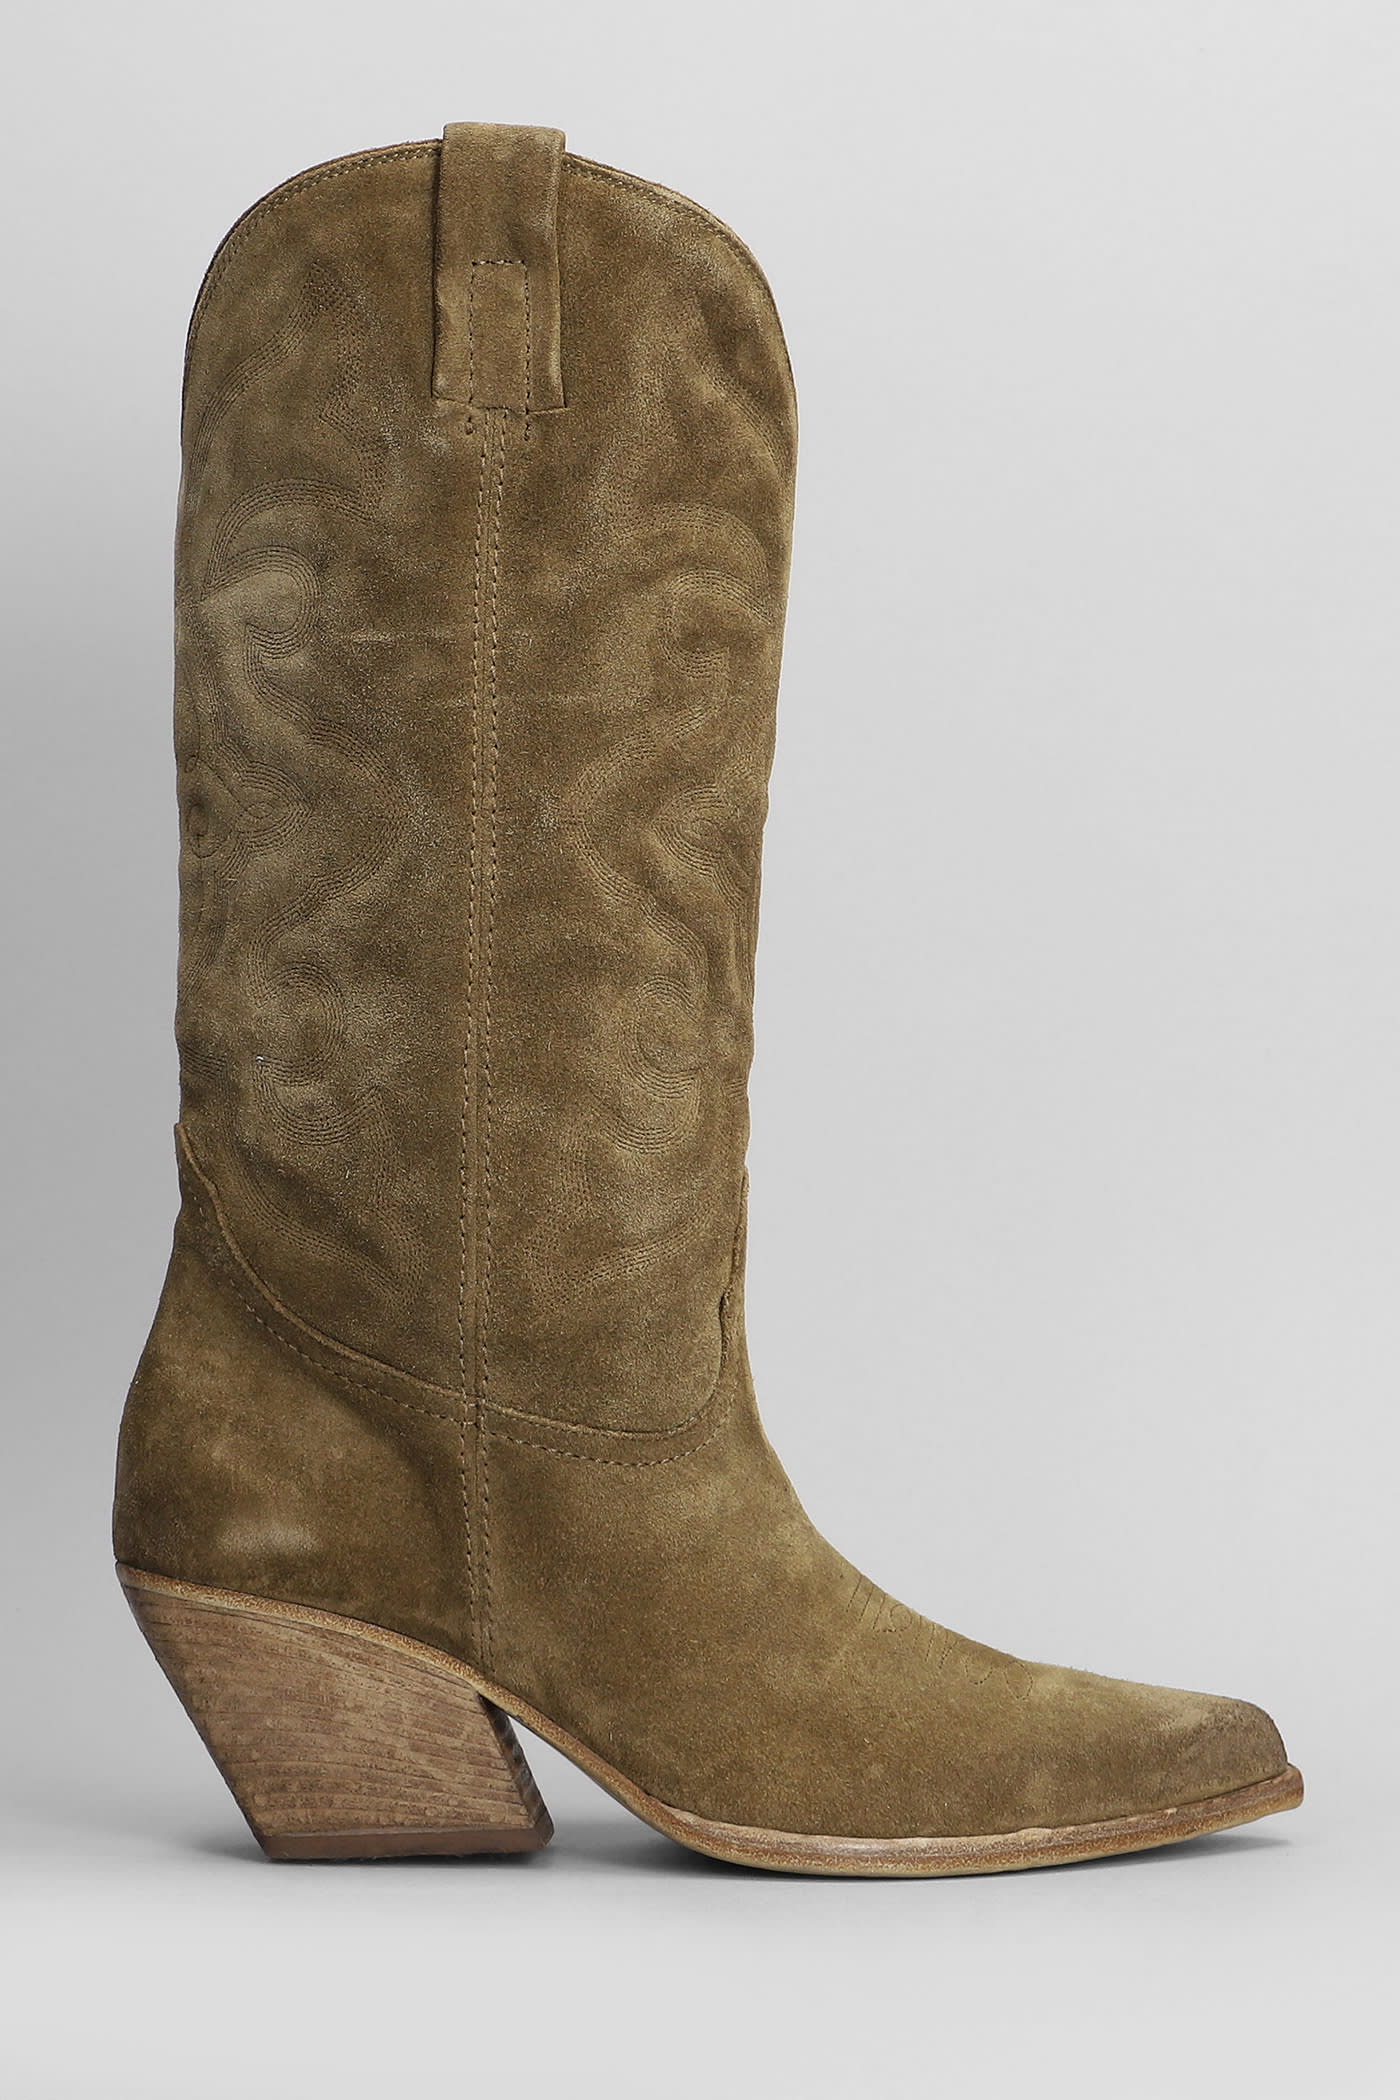 Texan Boots In Taupe Suede